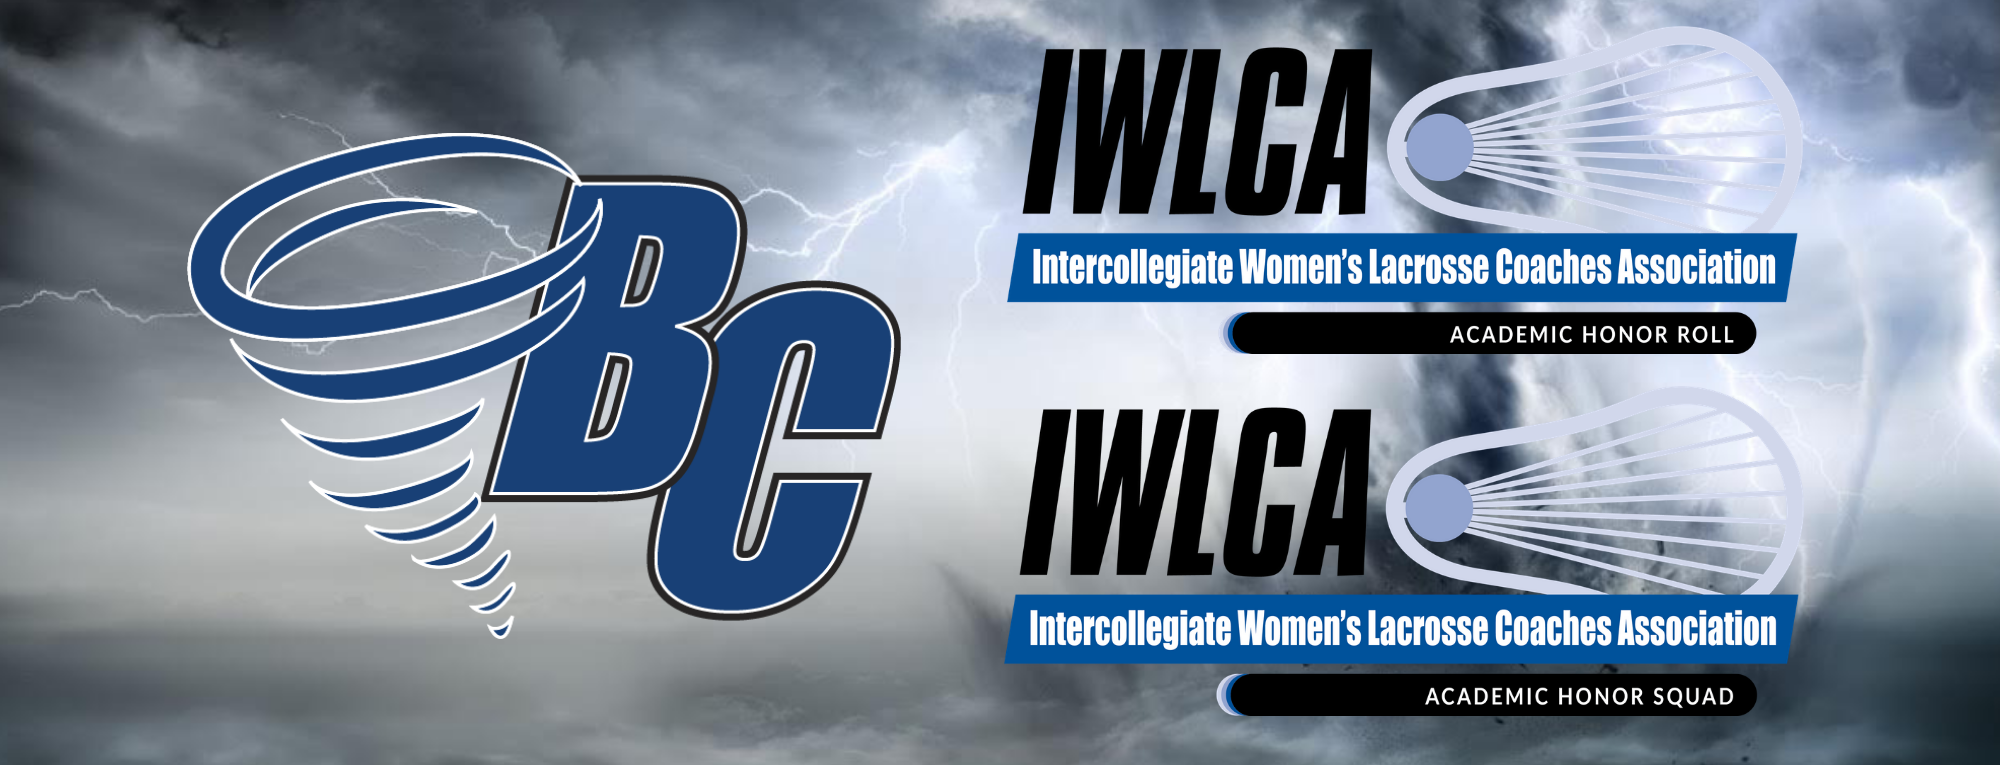 BC Named IWLCA Honor Squad; Four Tornados Earn Honor Roll